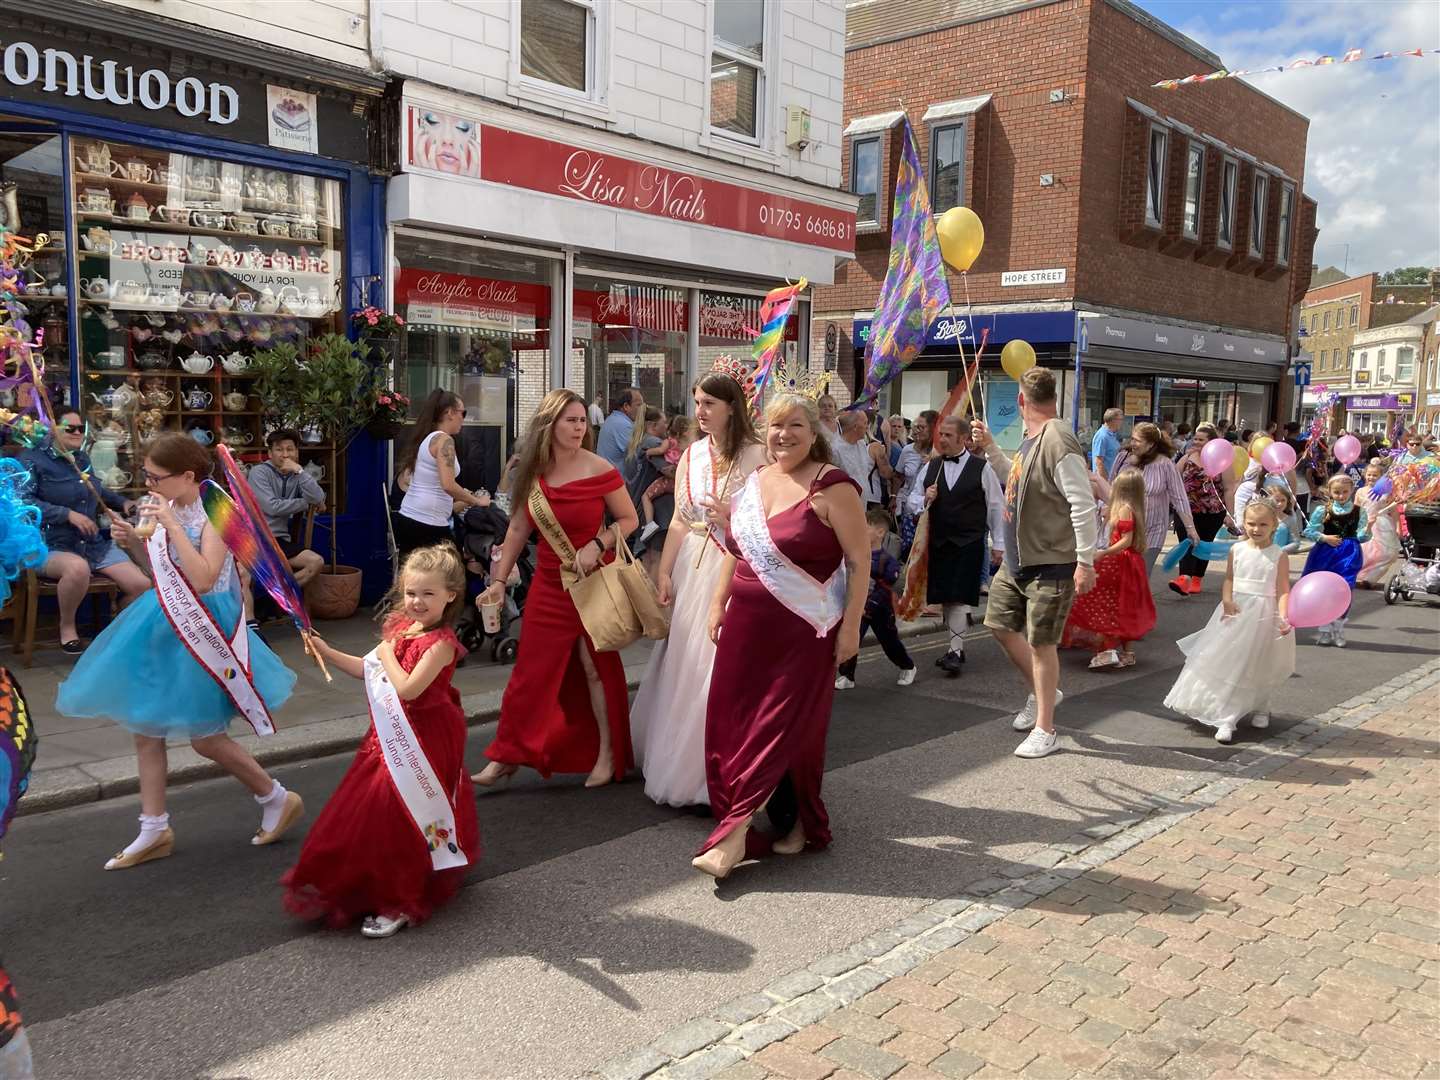 Pageant queens swapped floats for their feet in a walking parade